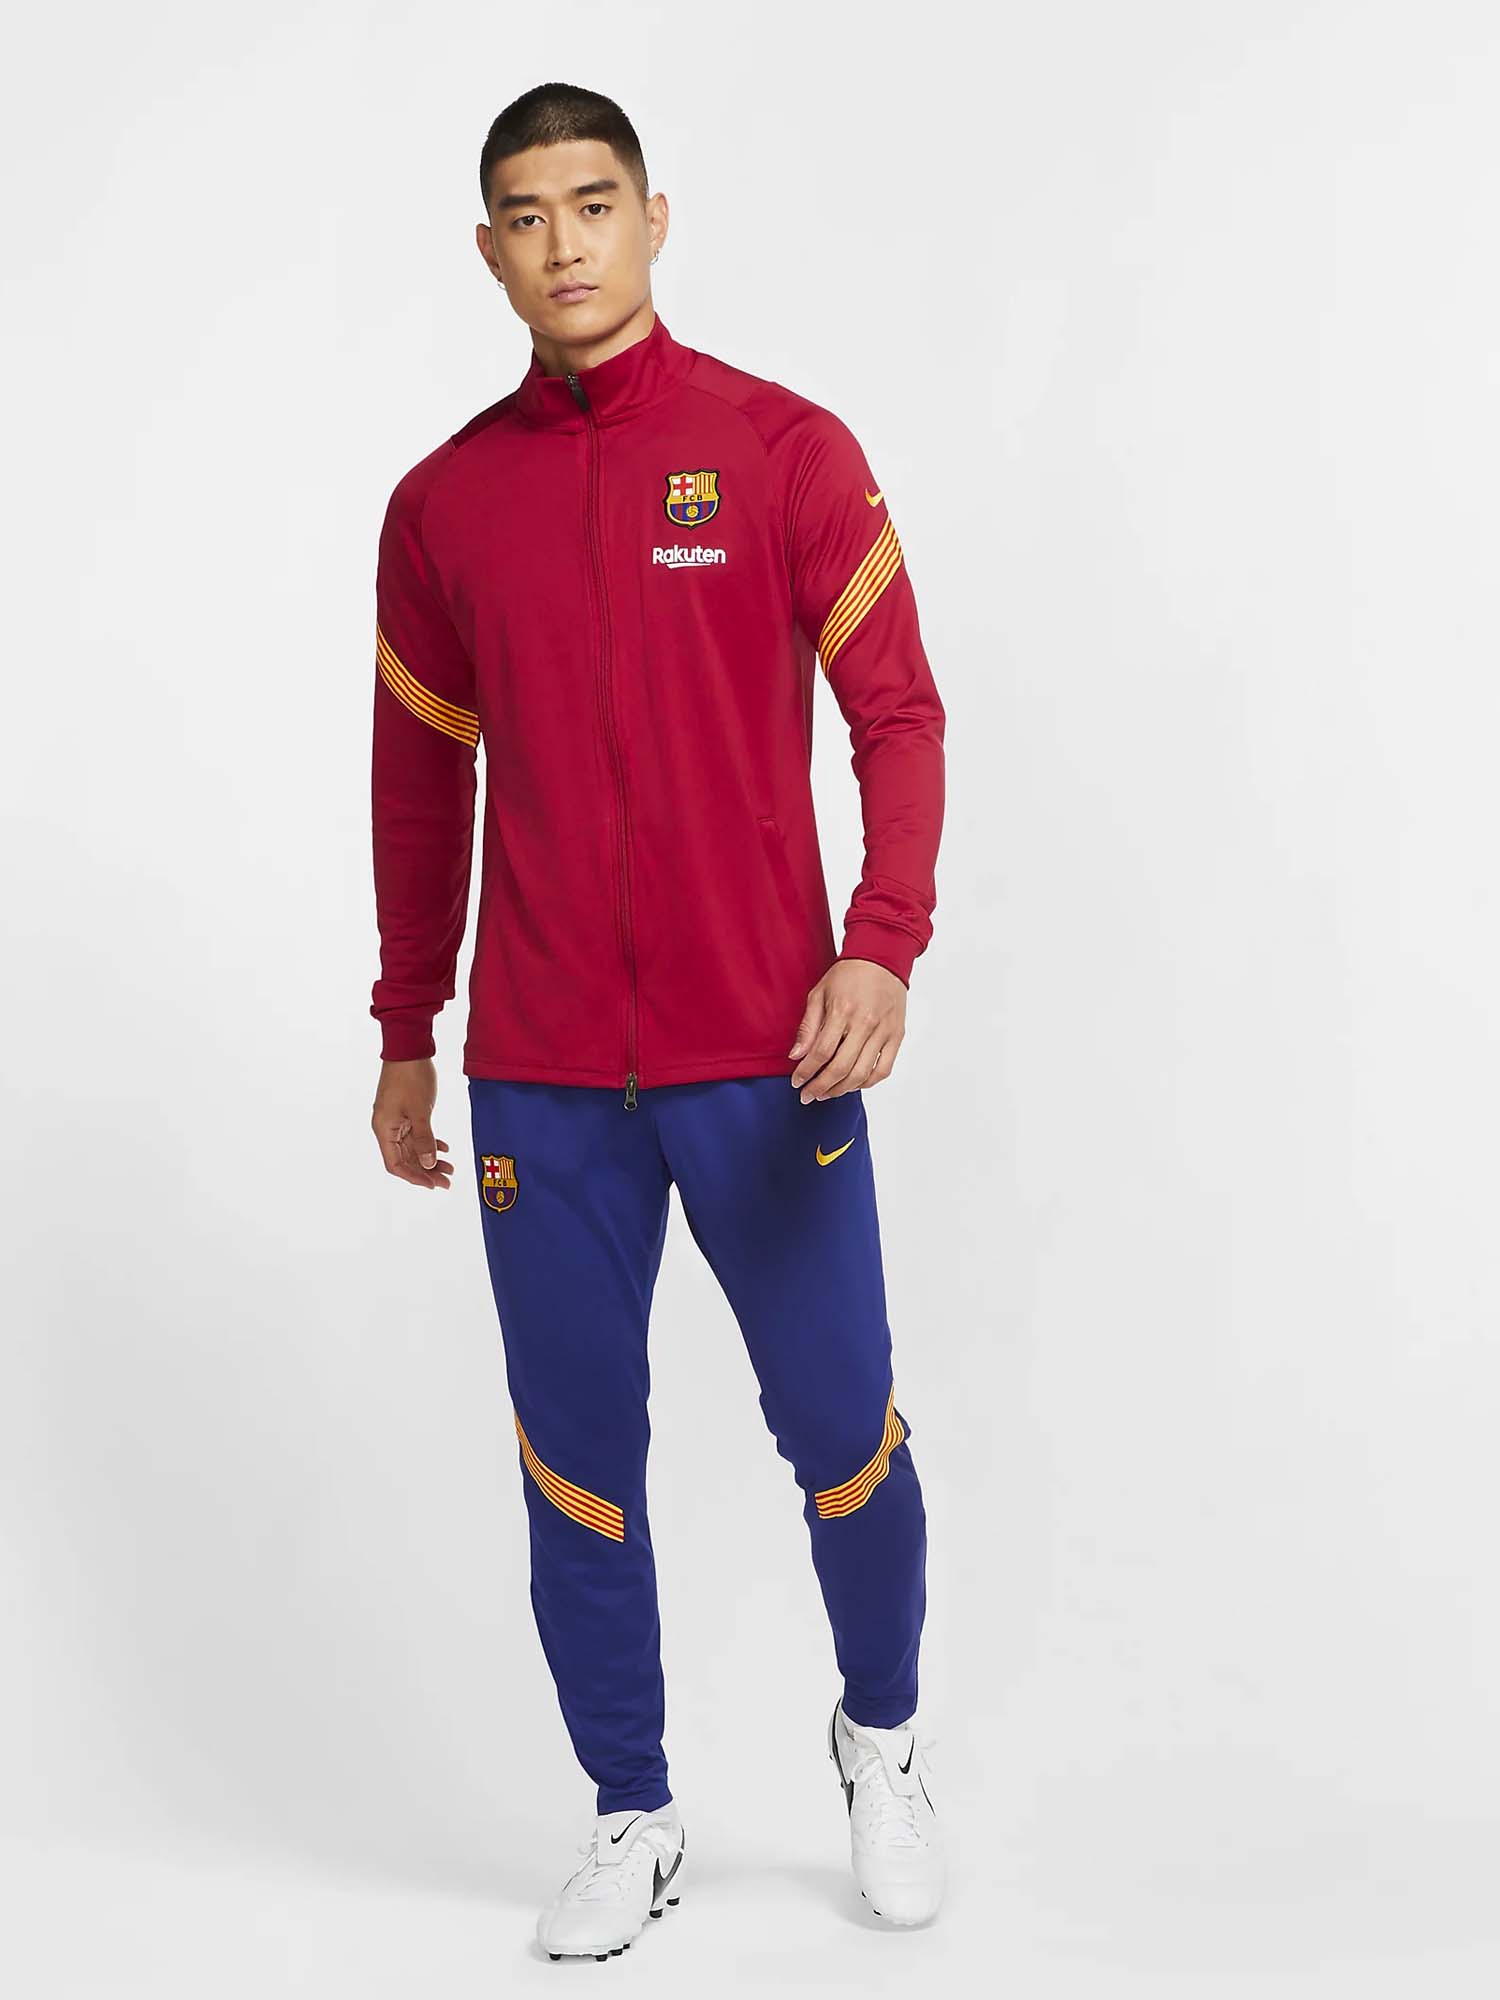 Fc Barcelona Training Collection portrait soccerbible 20 21_0027_Layer 5.jpg